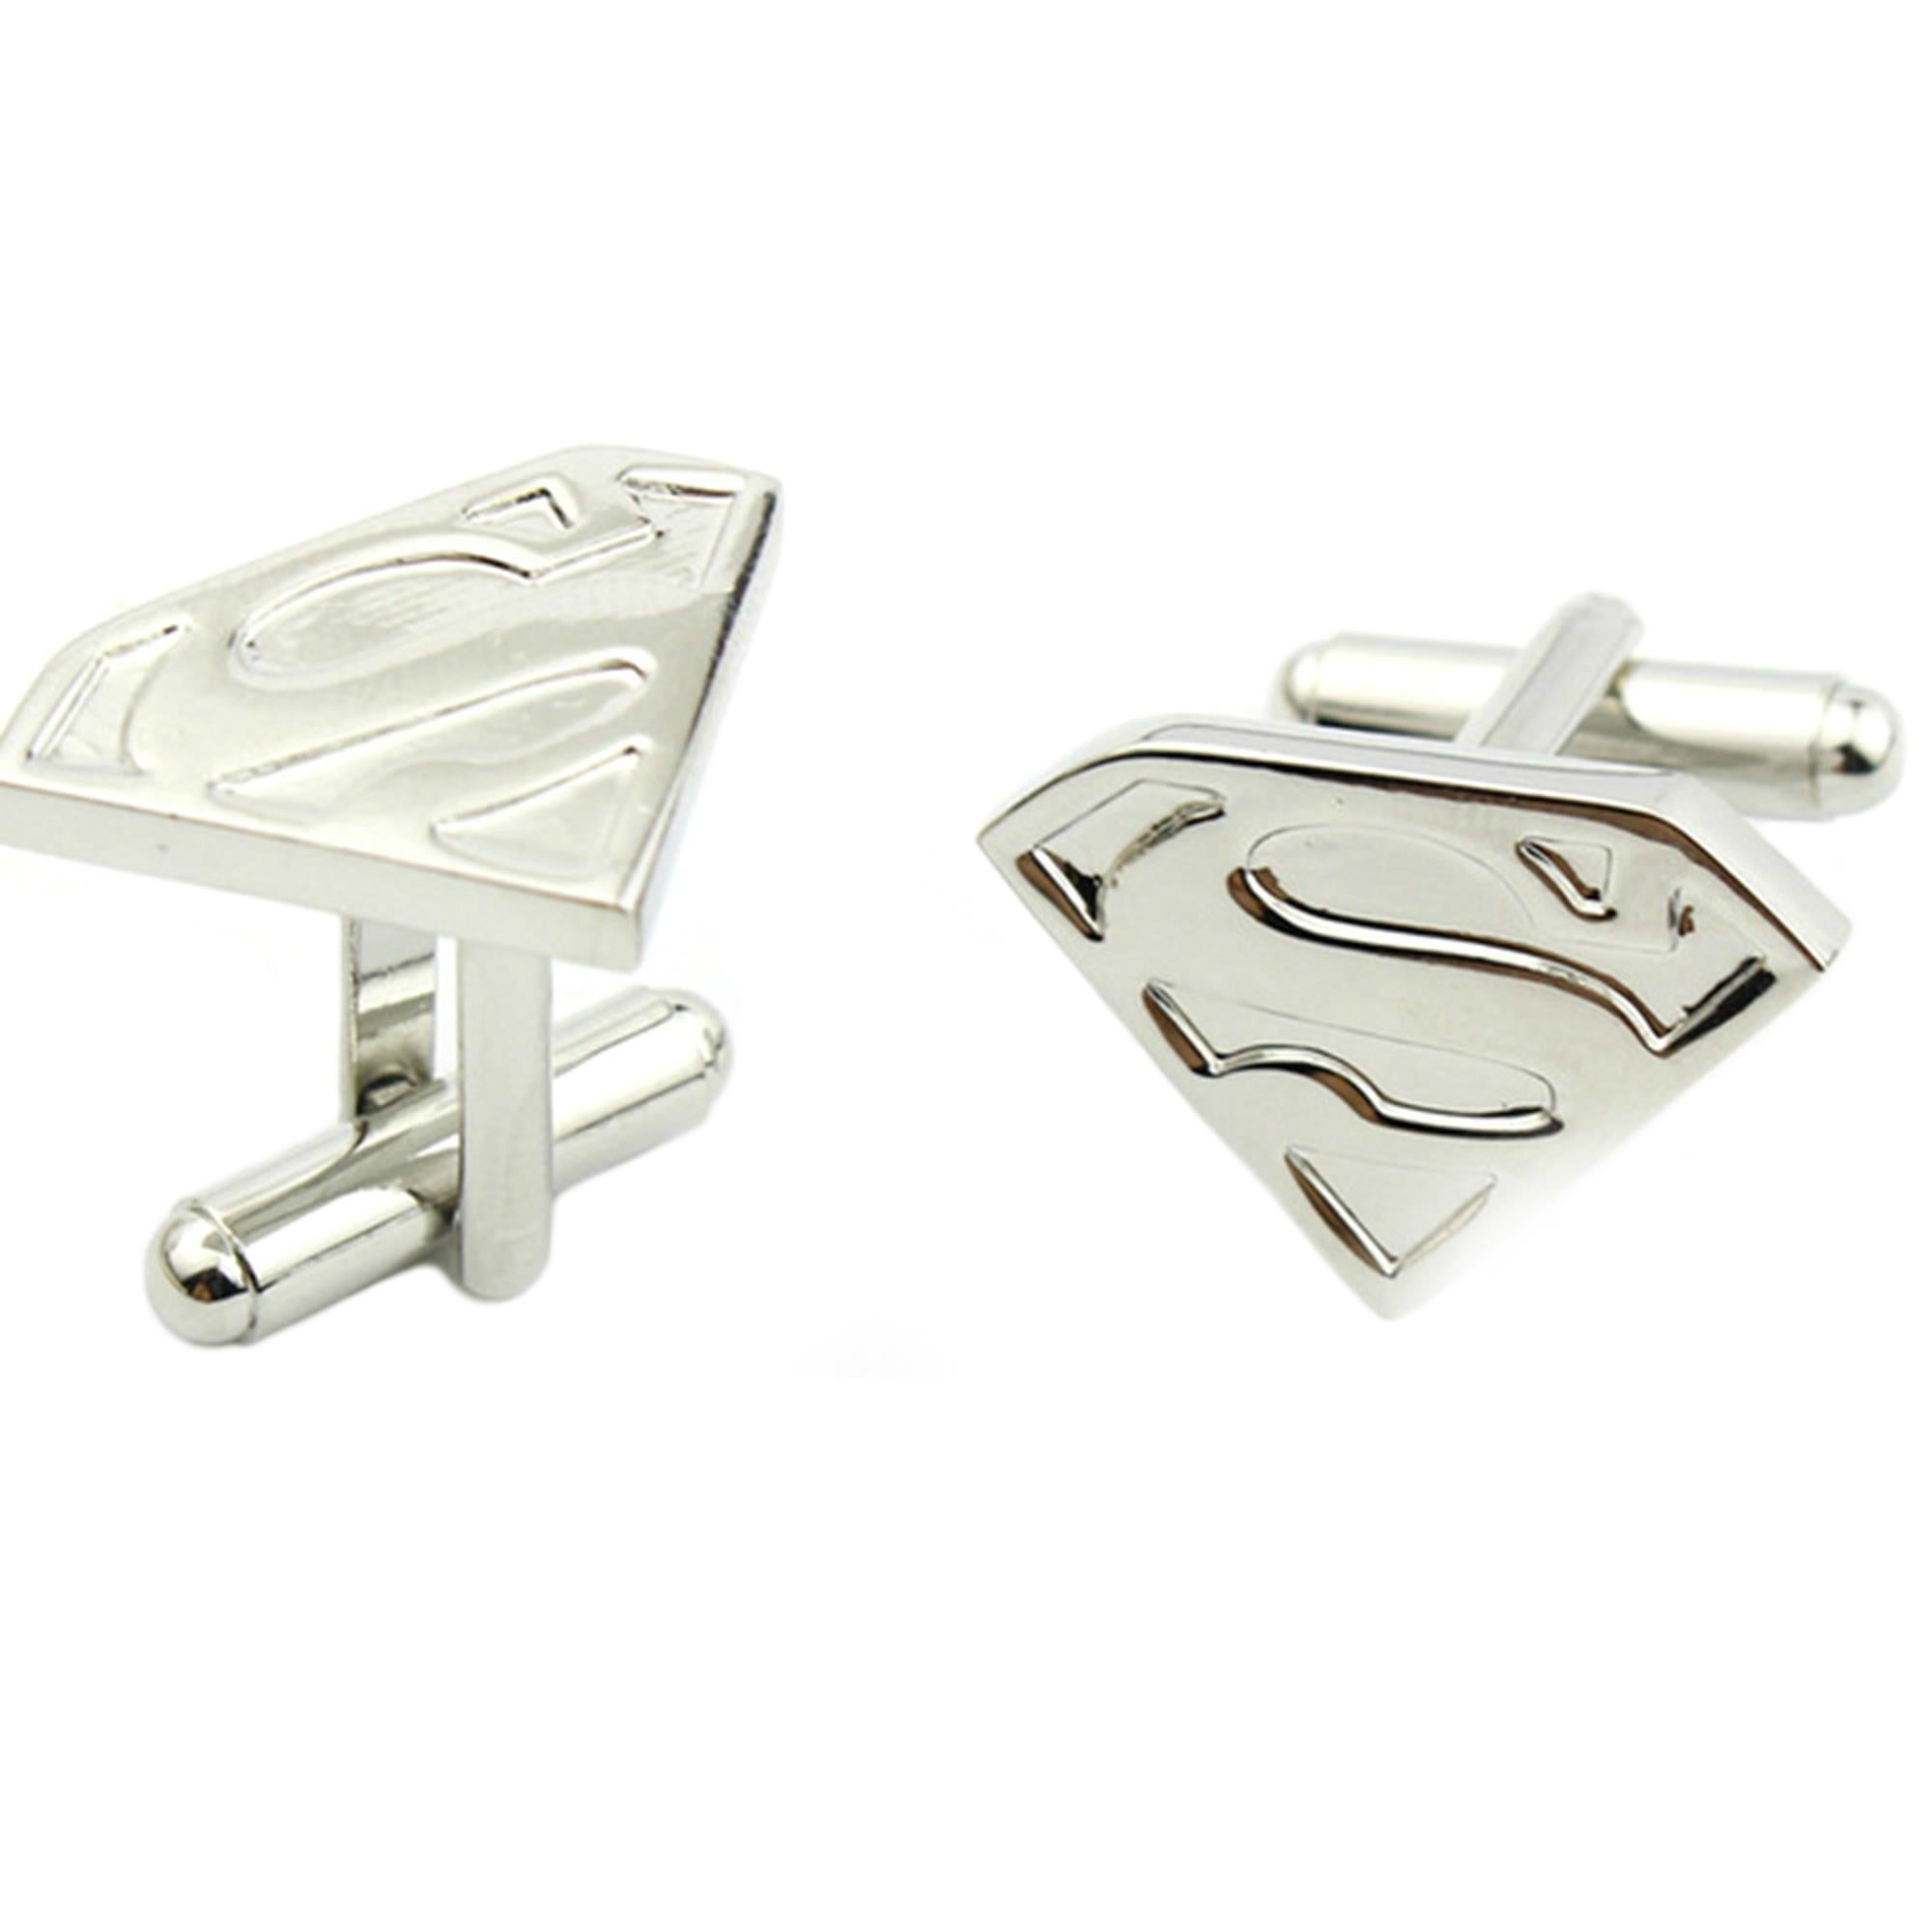 Details about   Cyborg Fashion Novelty Cuff Links Movie Comic Series with Gift Box 